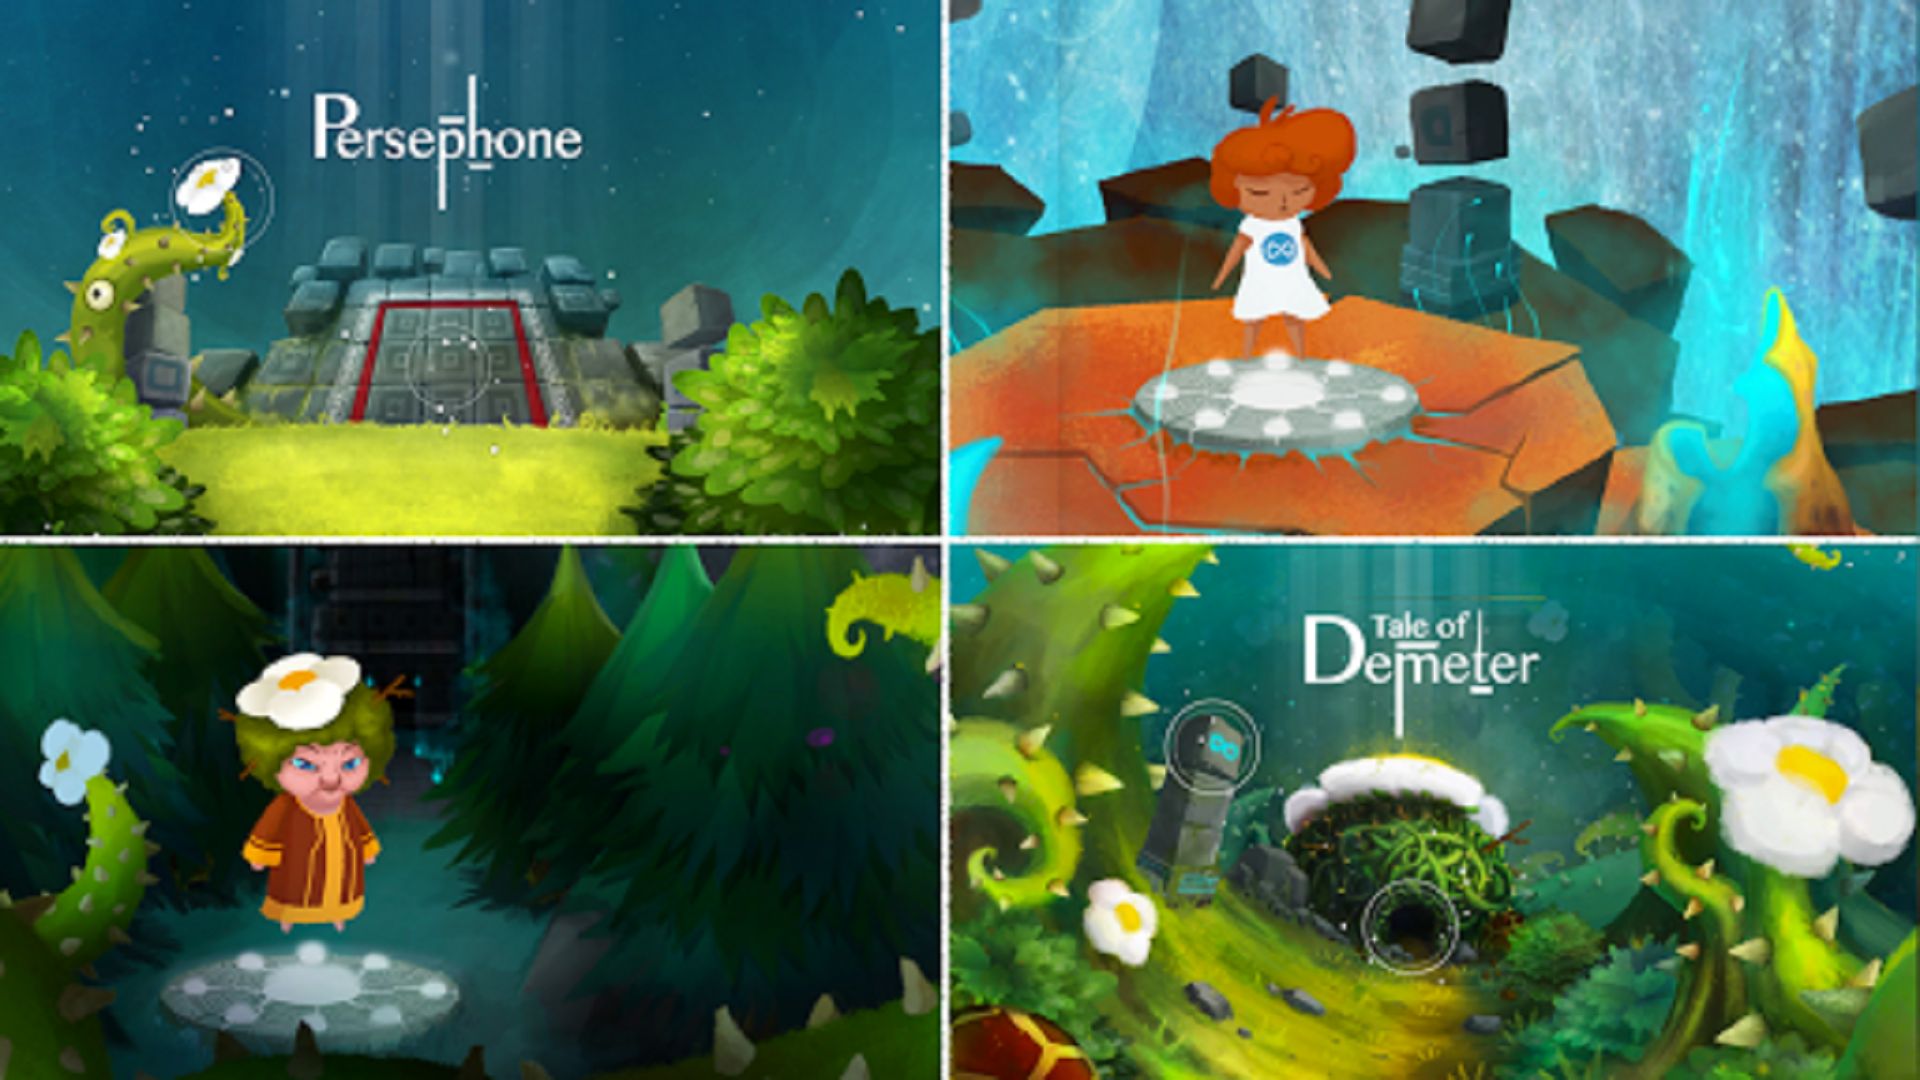 Persephone - A Puzzle Game